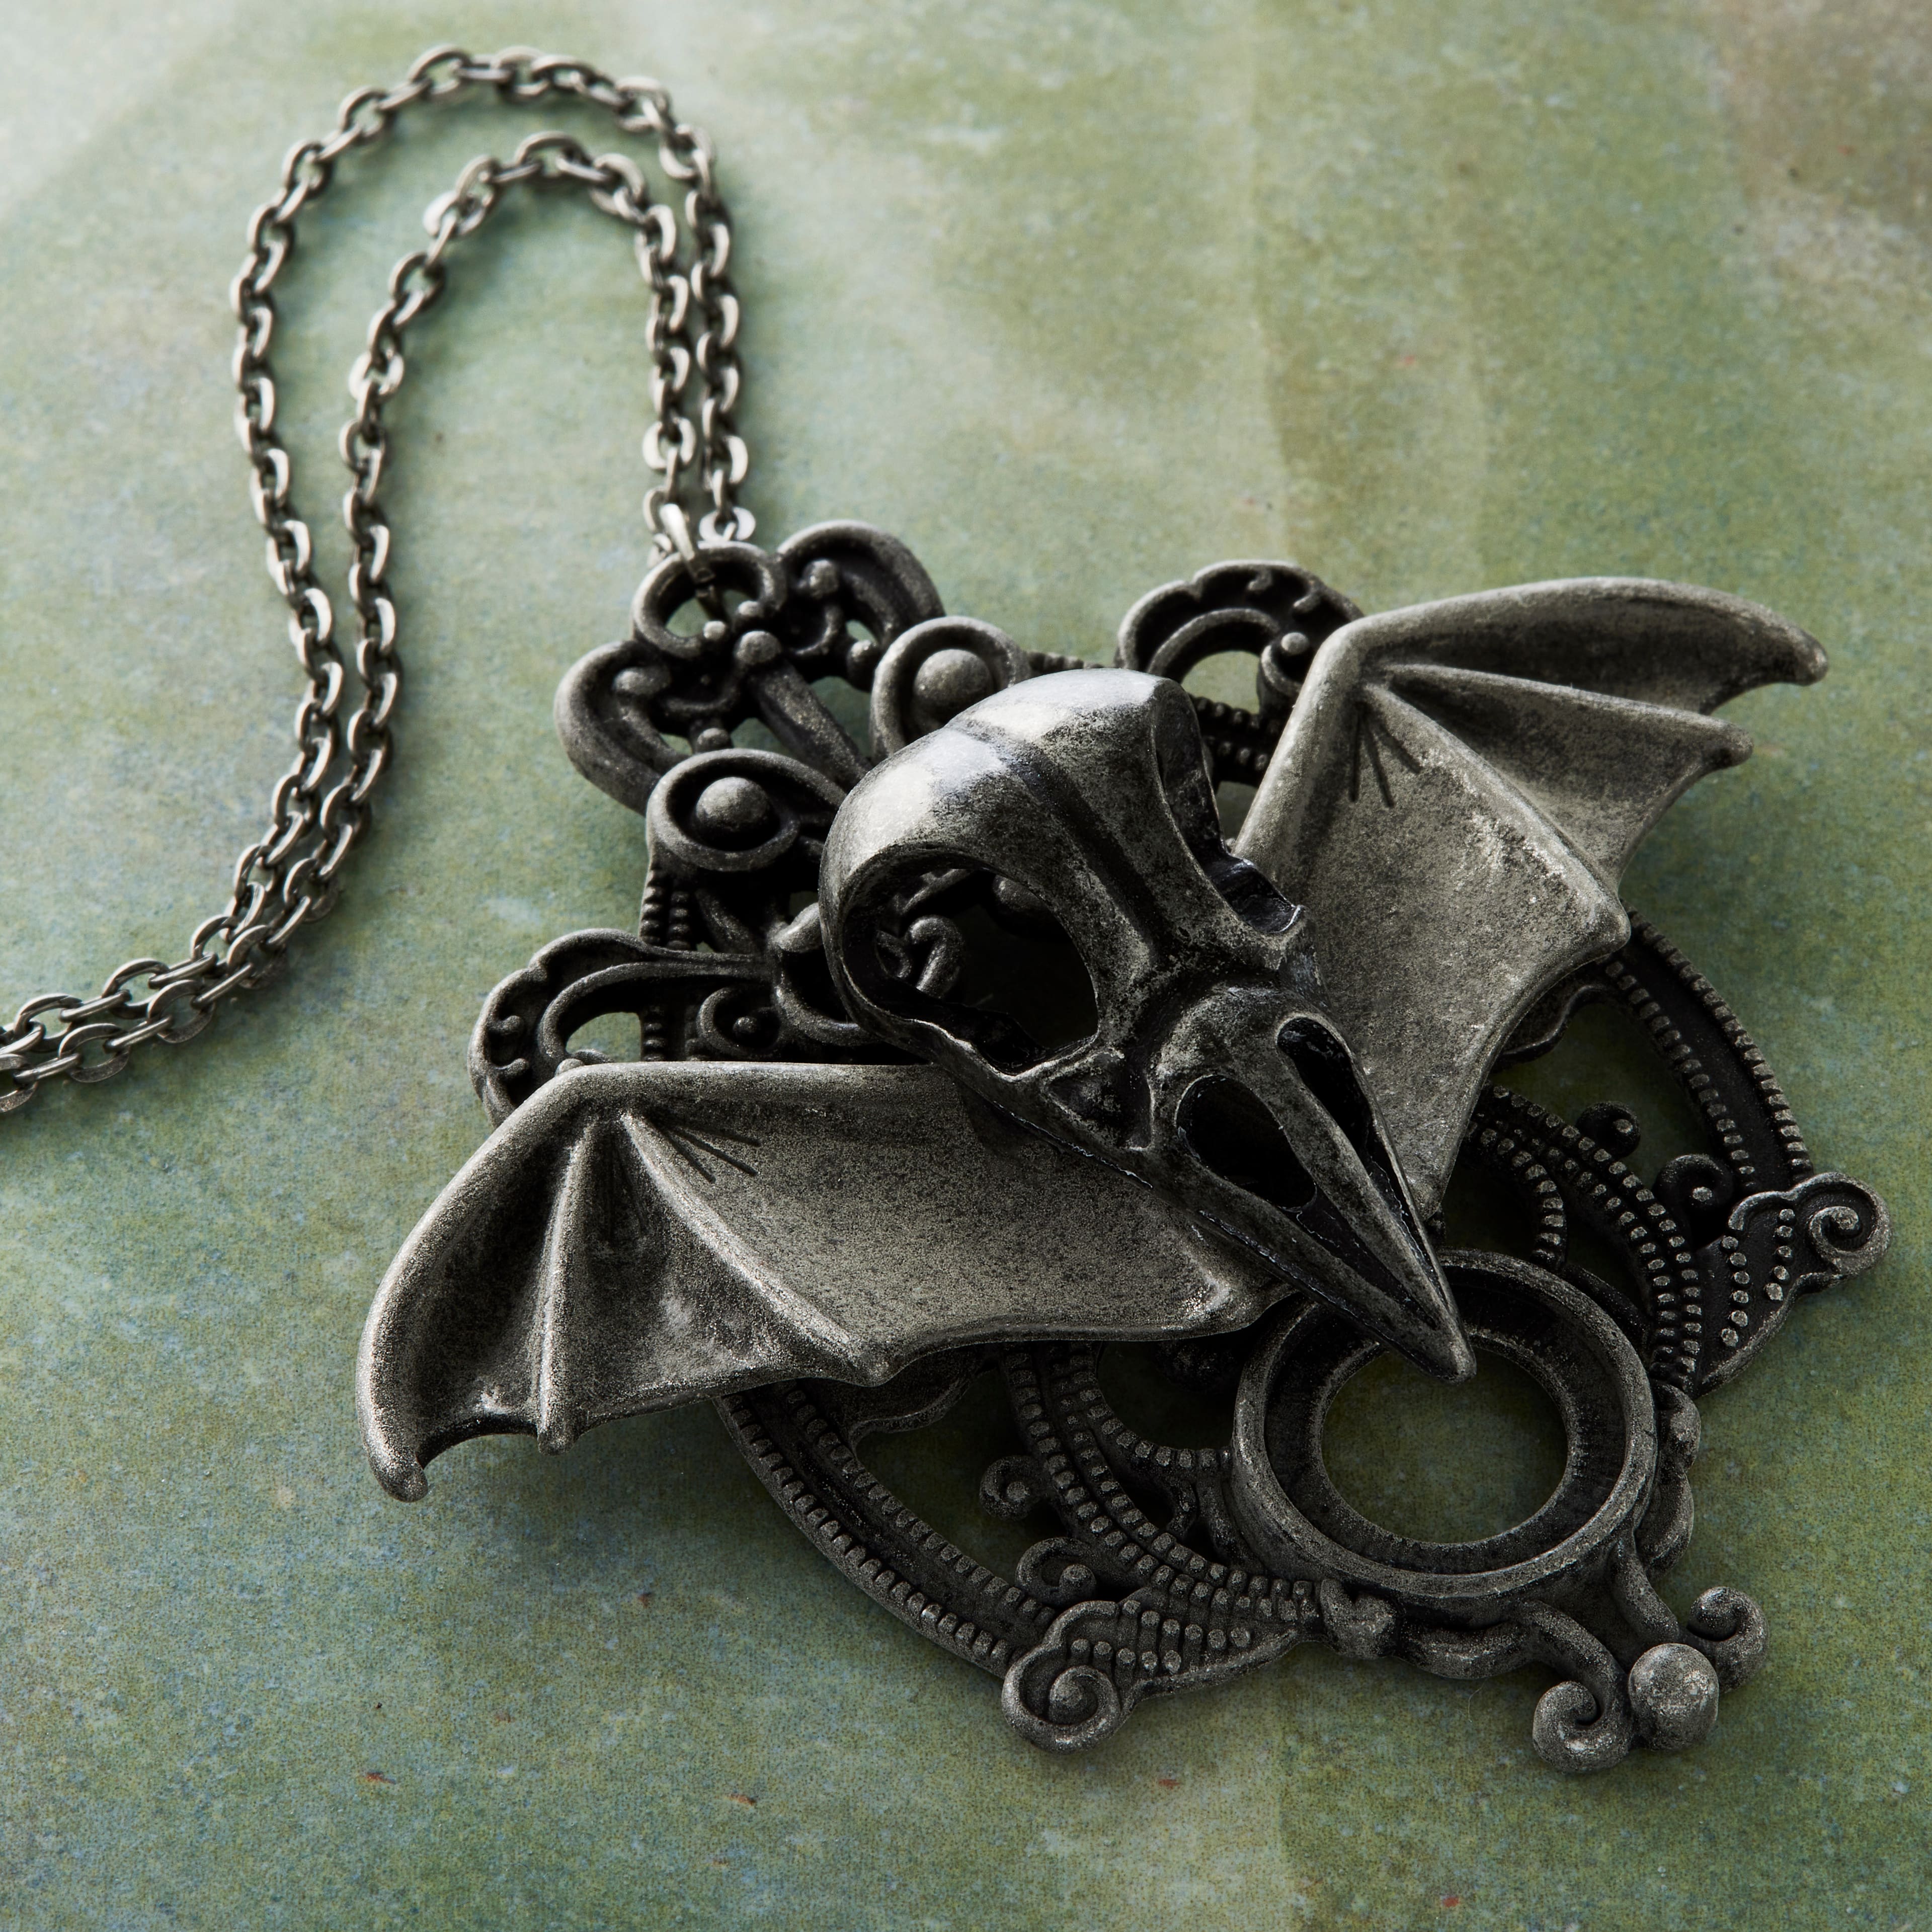 12 Pack: Found Objects&#x2122; Oxidized Silver Bat Pendant by Bead Landing&#x2122;